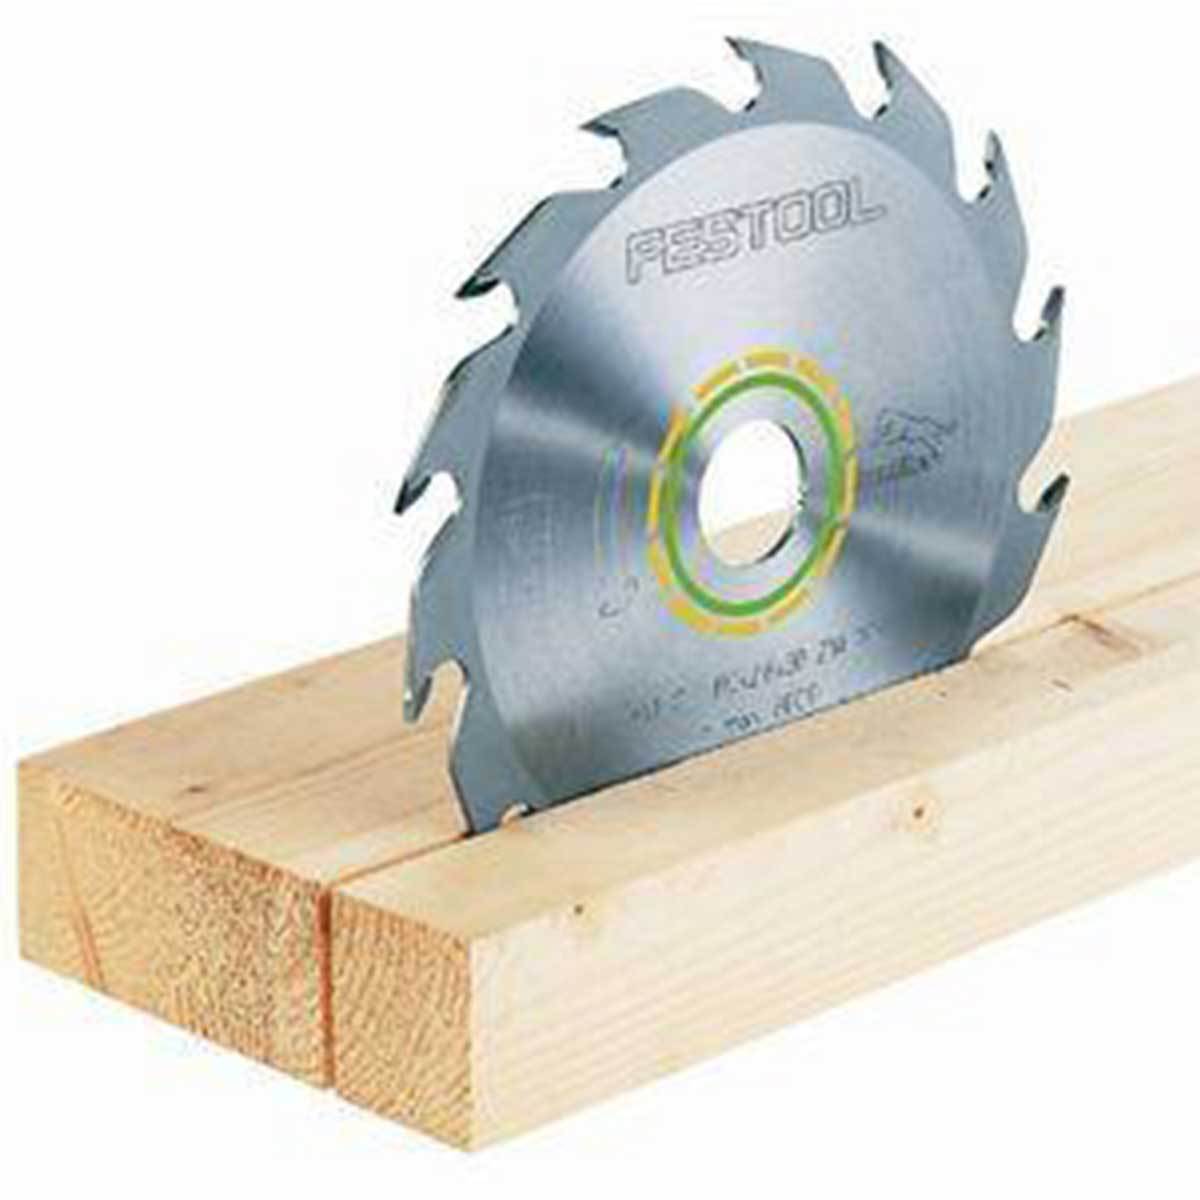 Ultimate Tools Festool TS 75 Track Saw Blades - For Any Material